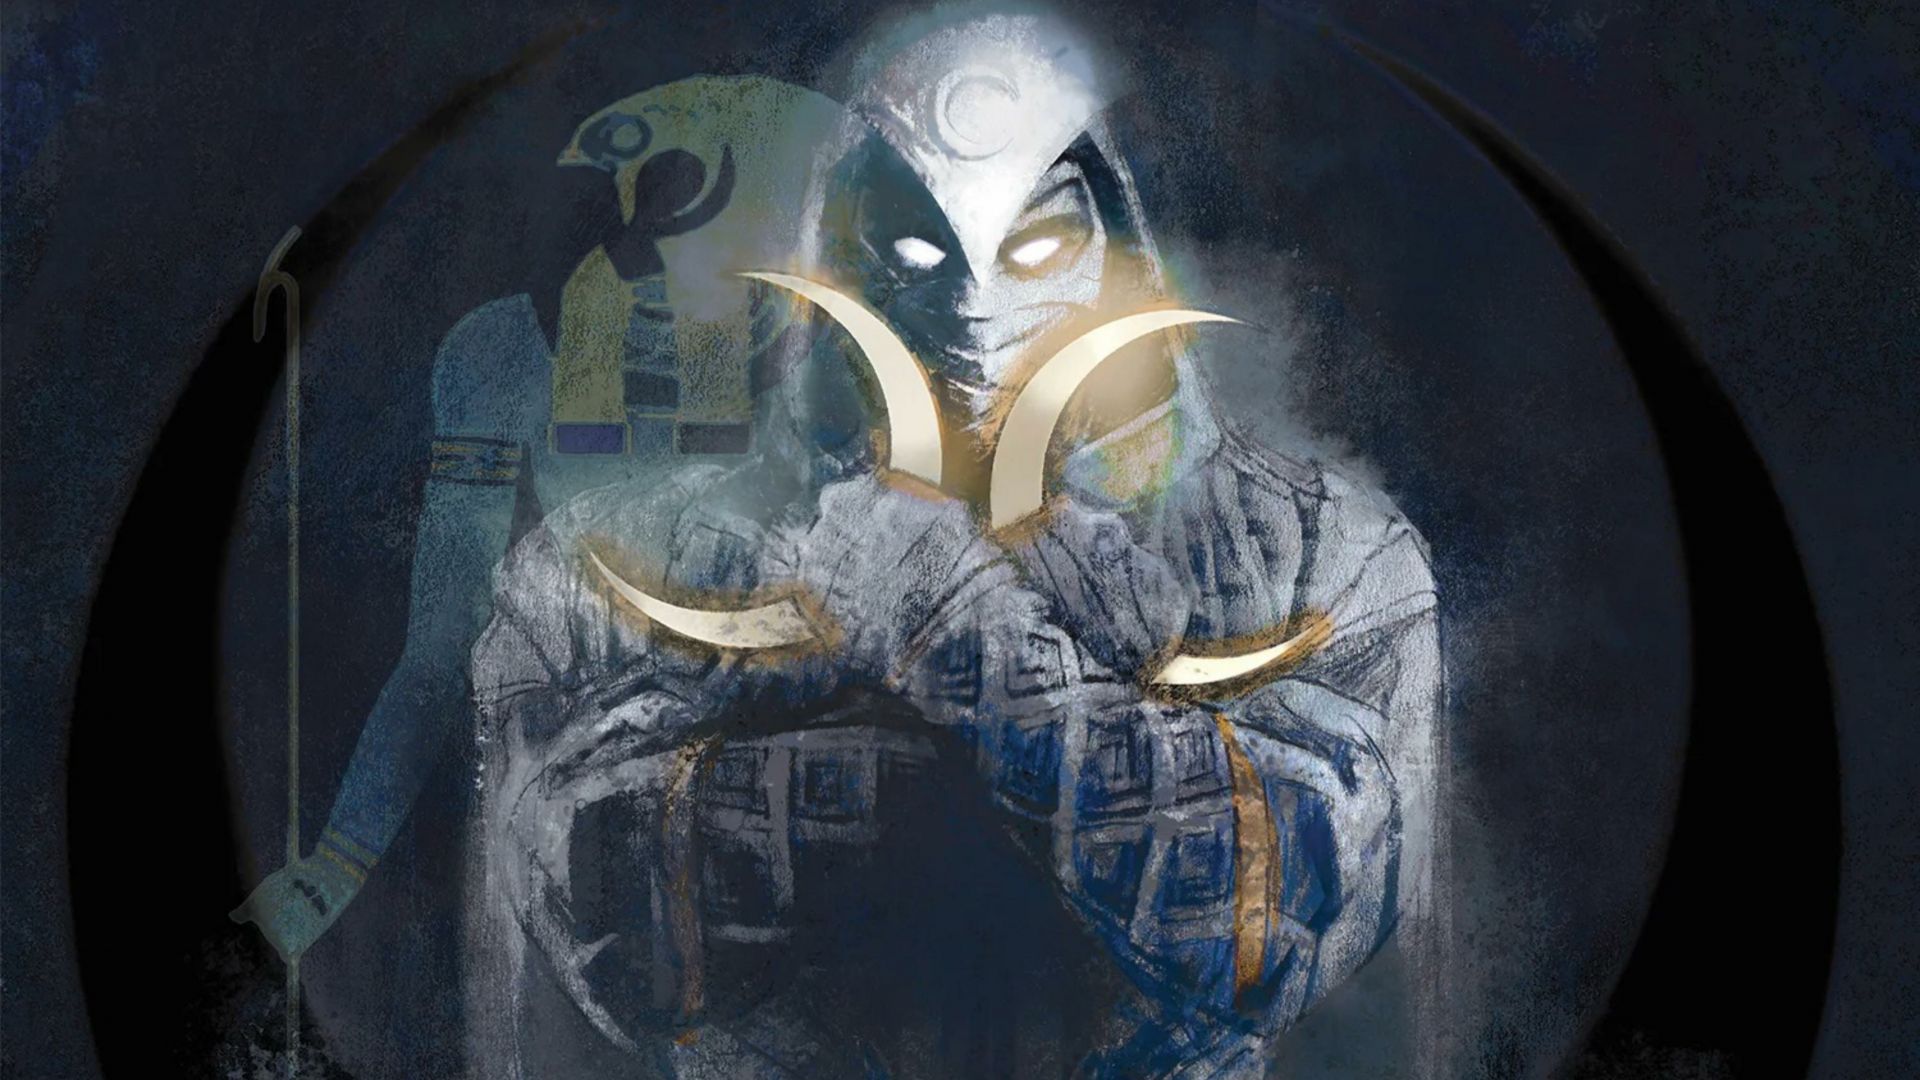 Moon knight, empire cover, marvel series, art wallpaper, hd image, picture, background, e8d45f